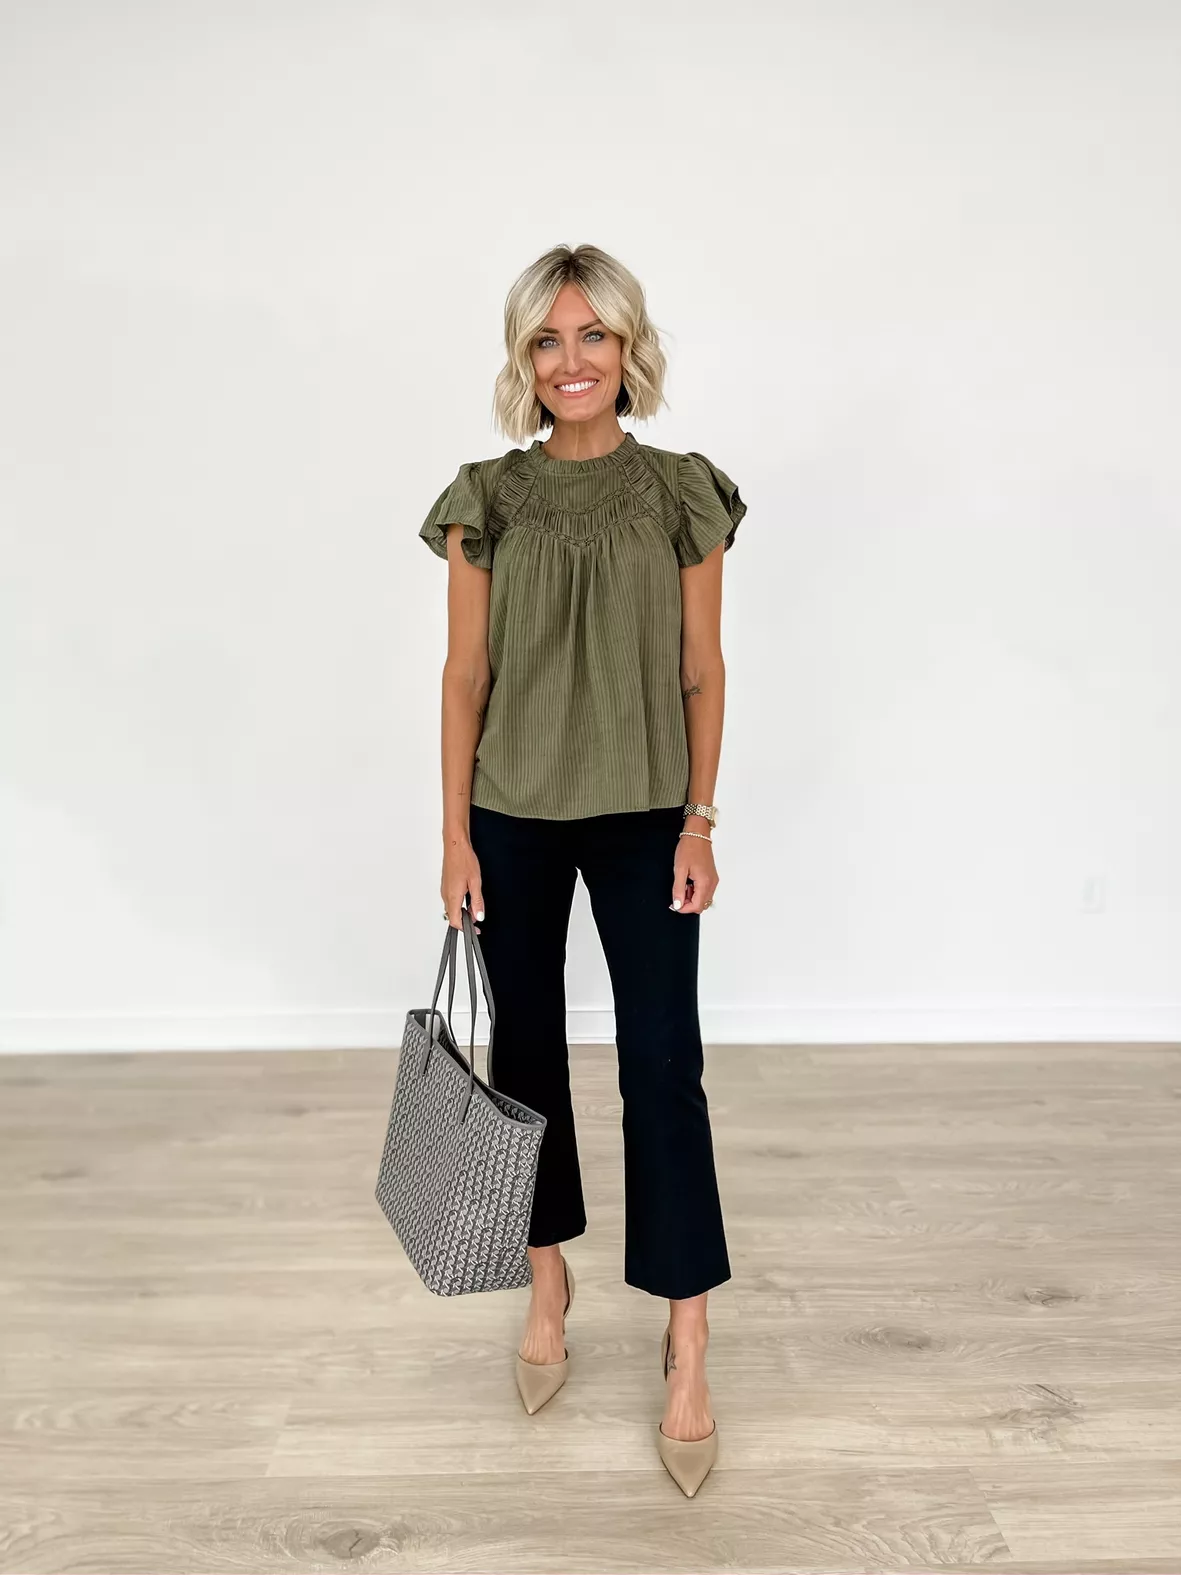 30+ Teacher Outfit Ideas for Your Most Stylish School Year Yet - Loverly  Grey